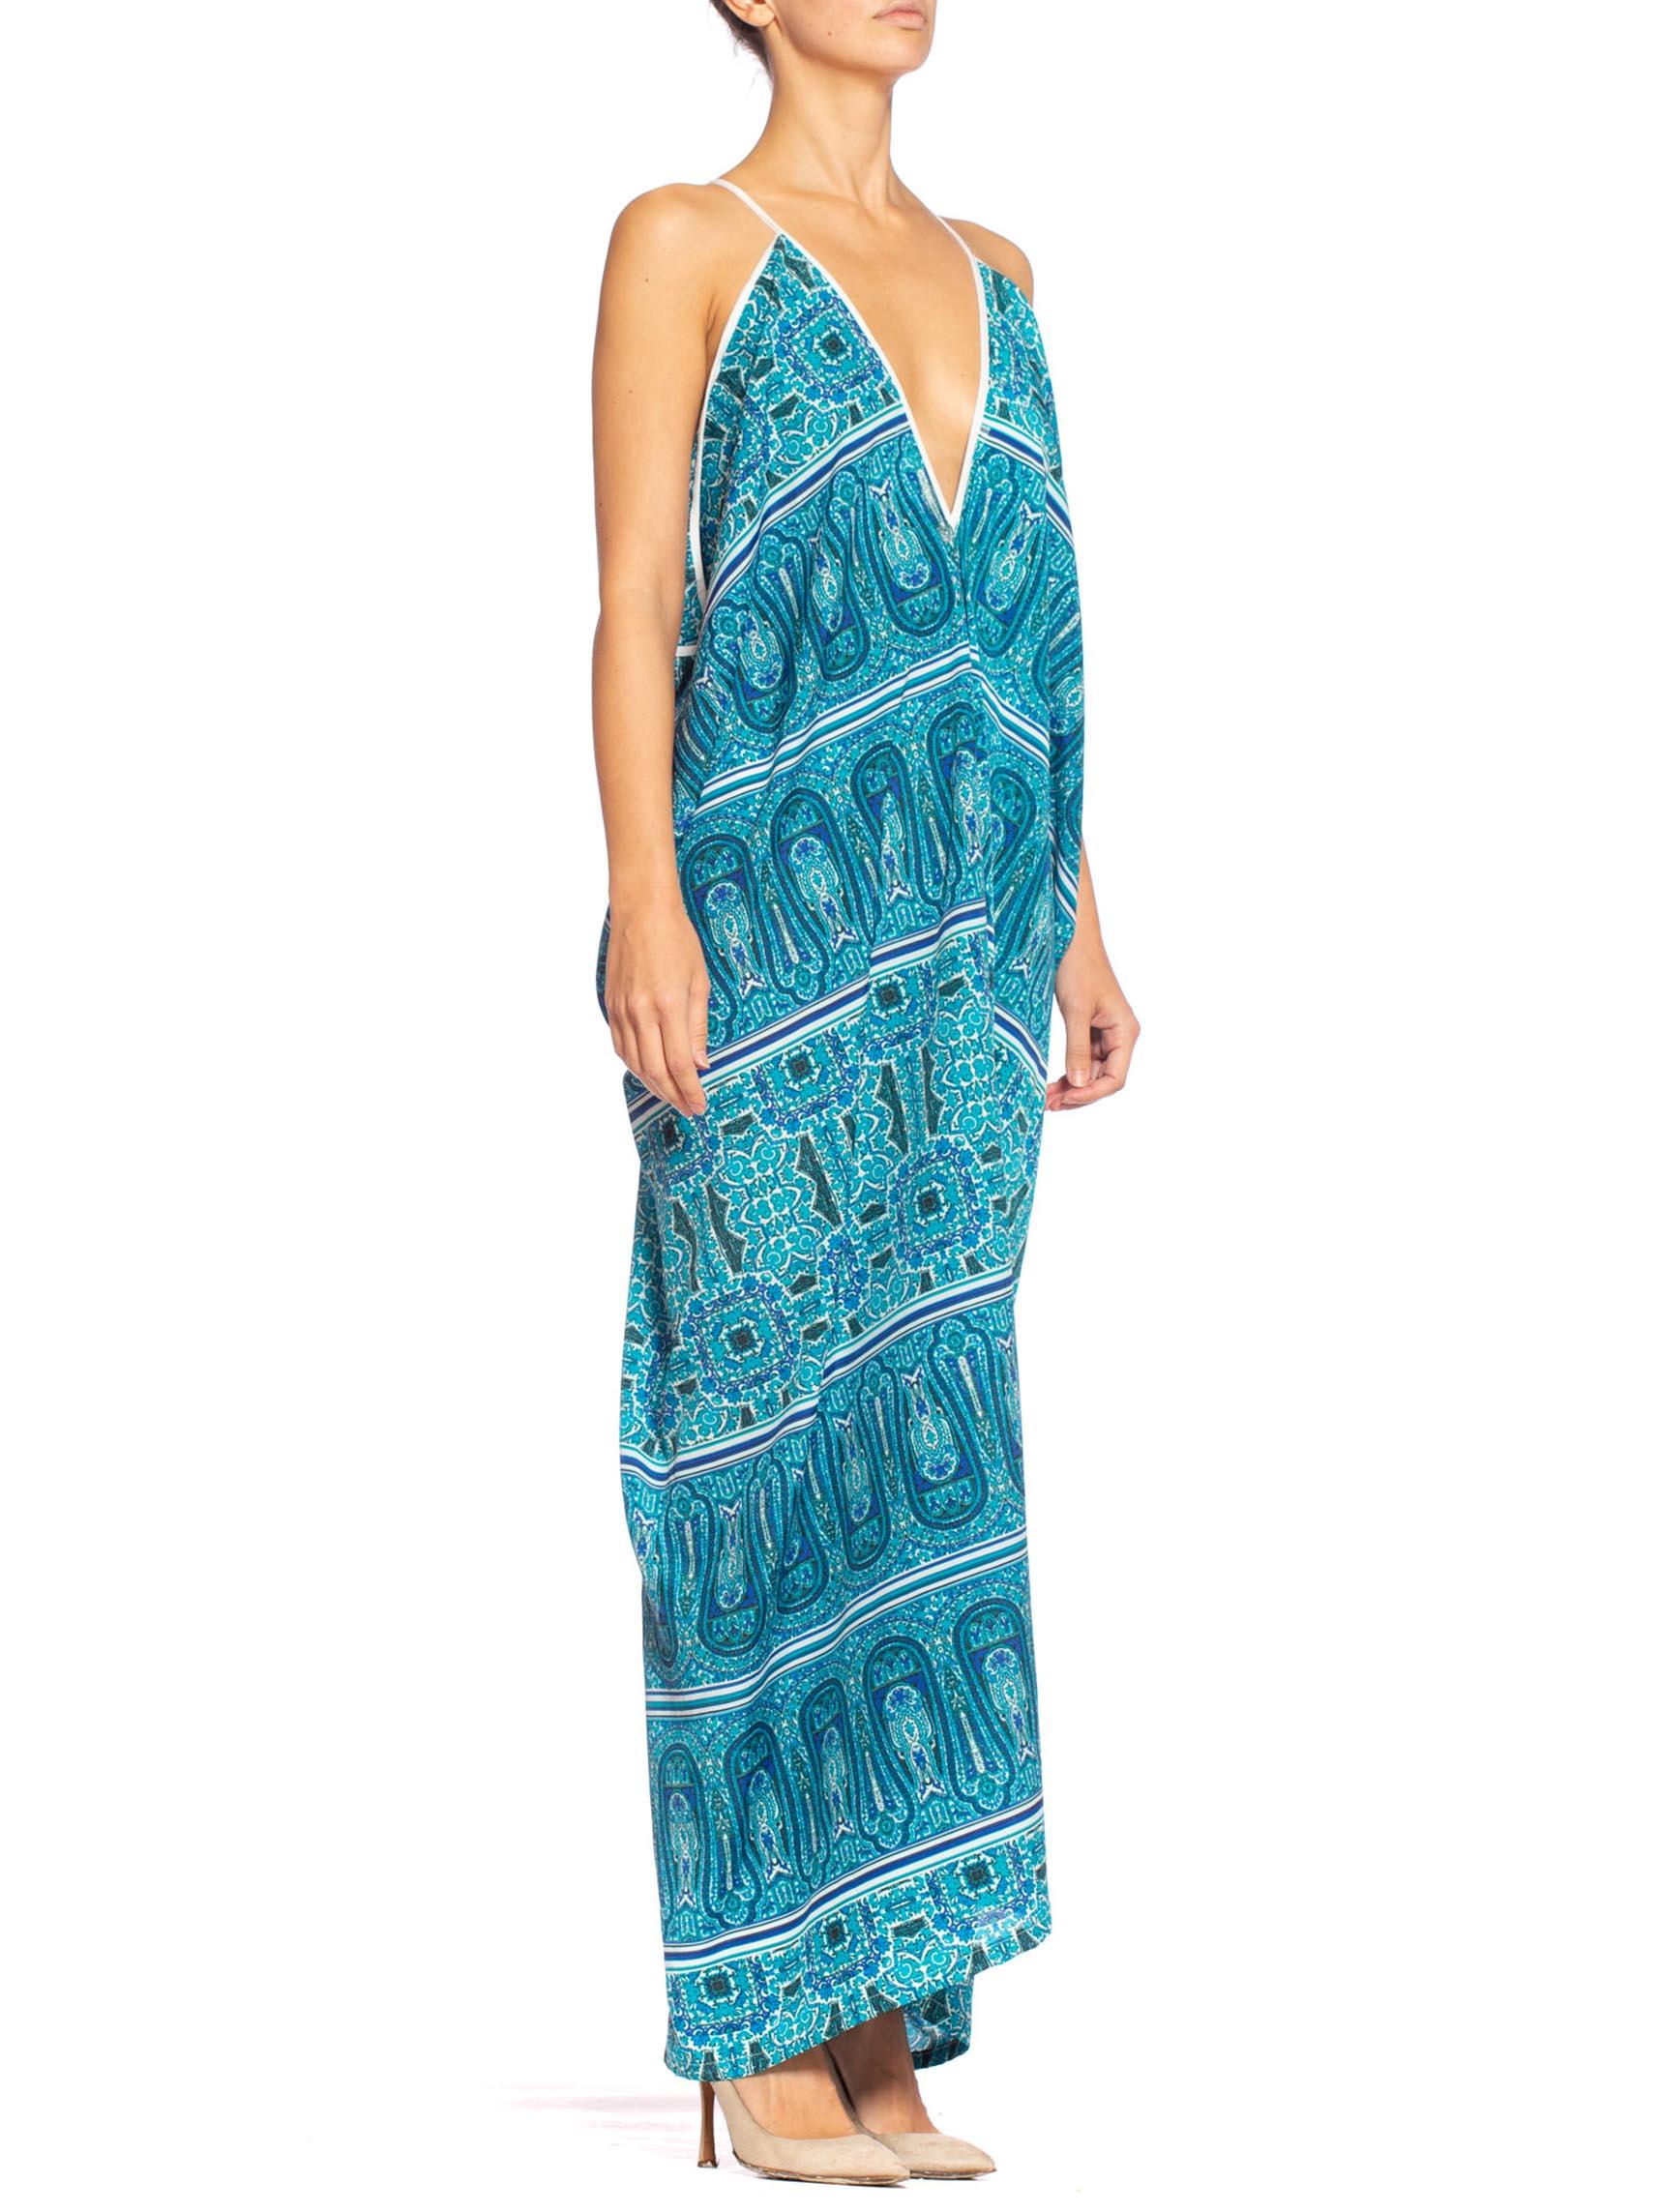 MORPHEW COLLECTION Teal Paisley Poly Blend Easy Breezy Everbody Maxi Dress Made 1